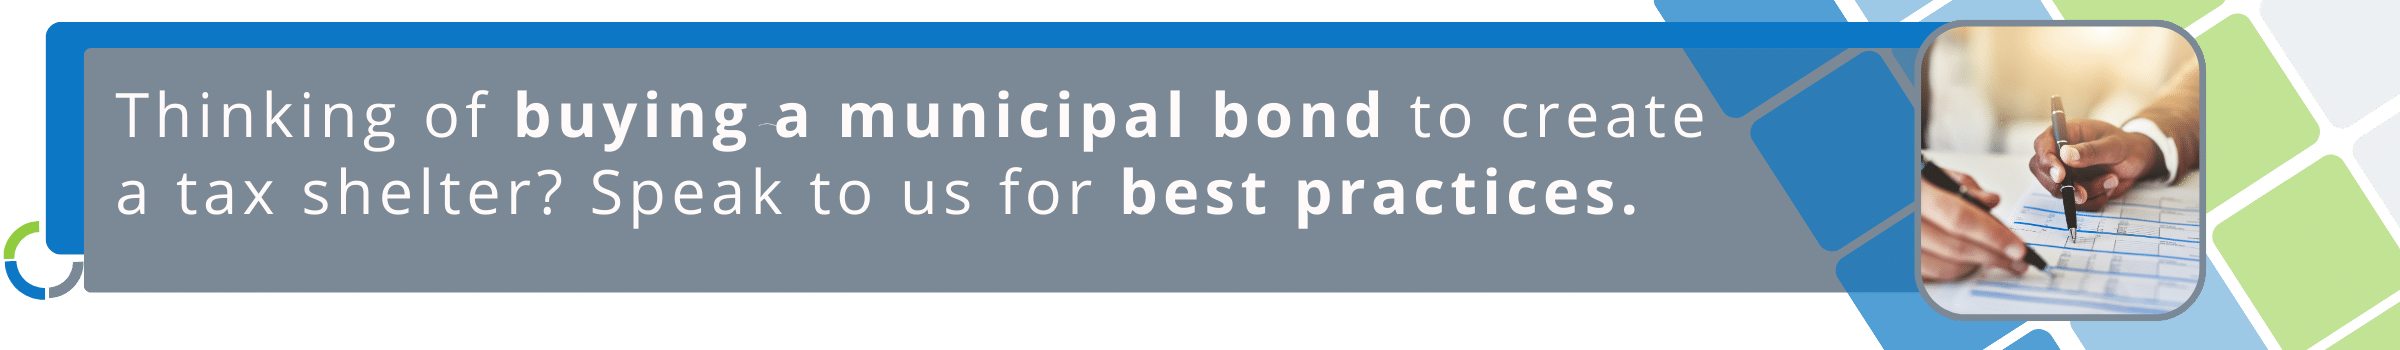 Fusion-CPA-can-help-with-municipal-bonds-as-a-tax-shelter